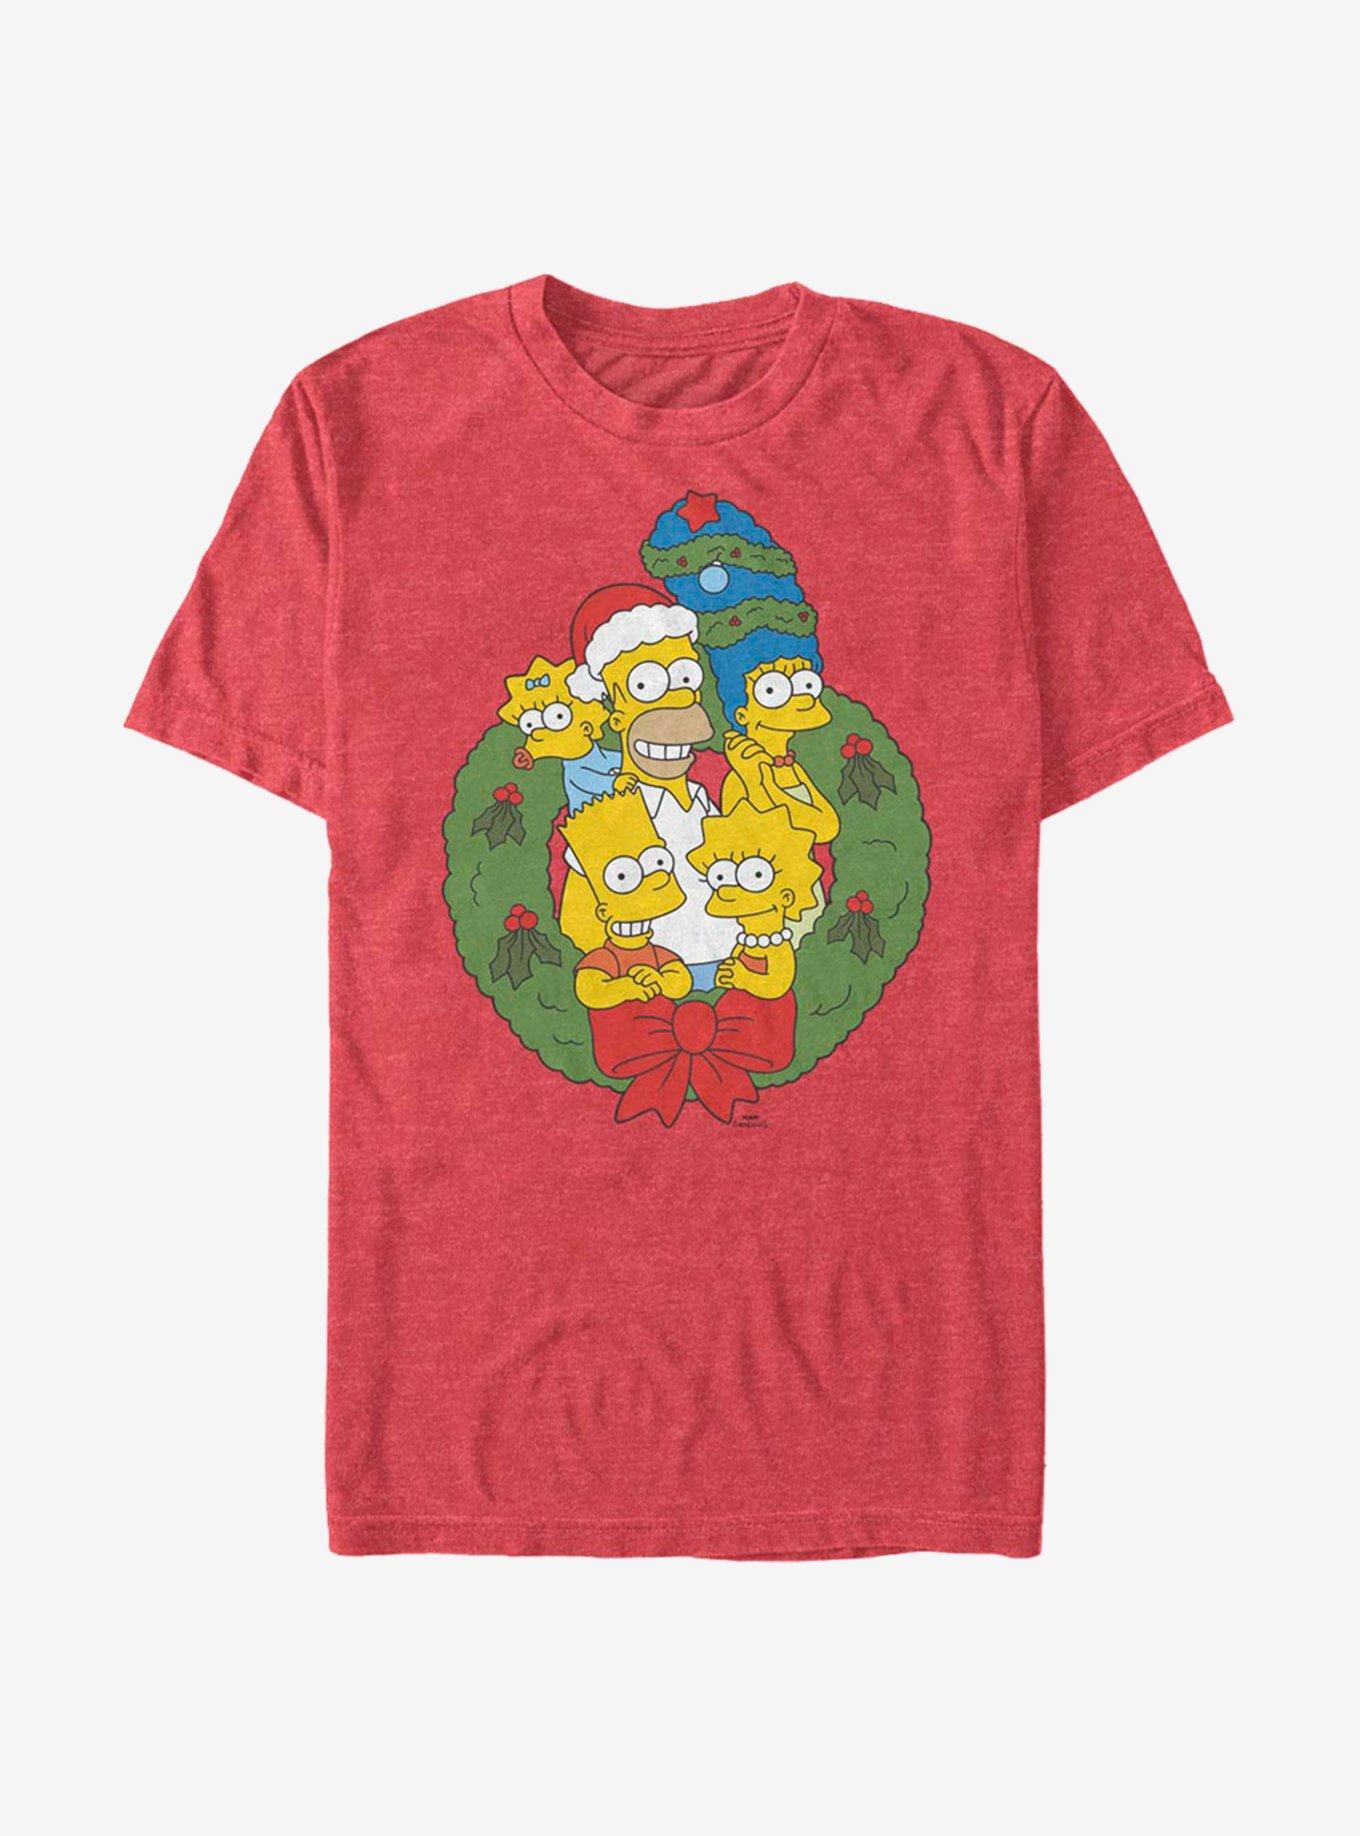 The Simpsons Family Holiday T-Shirt Hot RED Wreath | Topic 